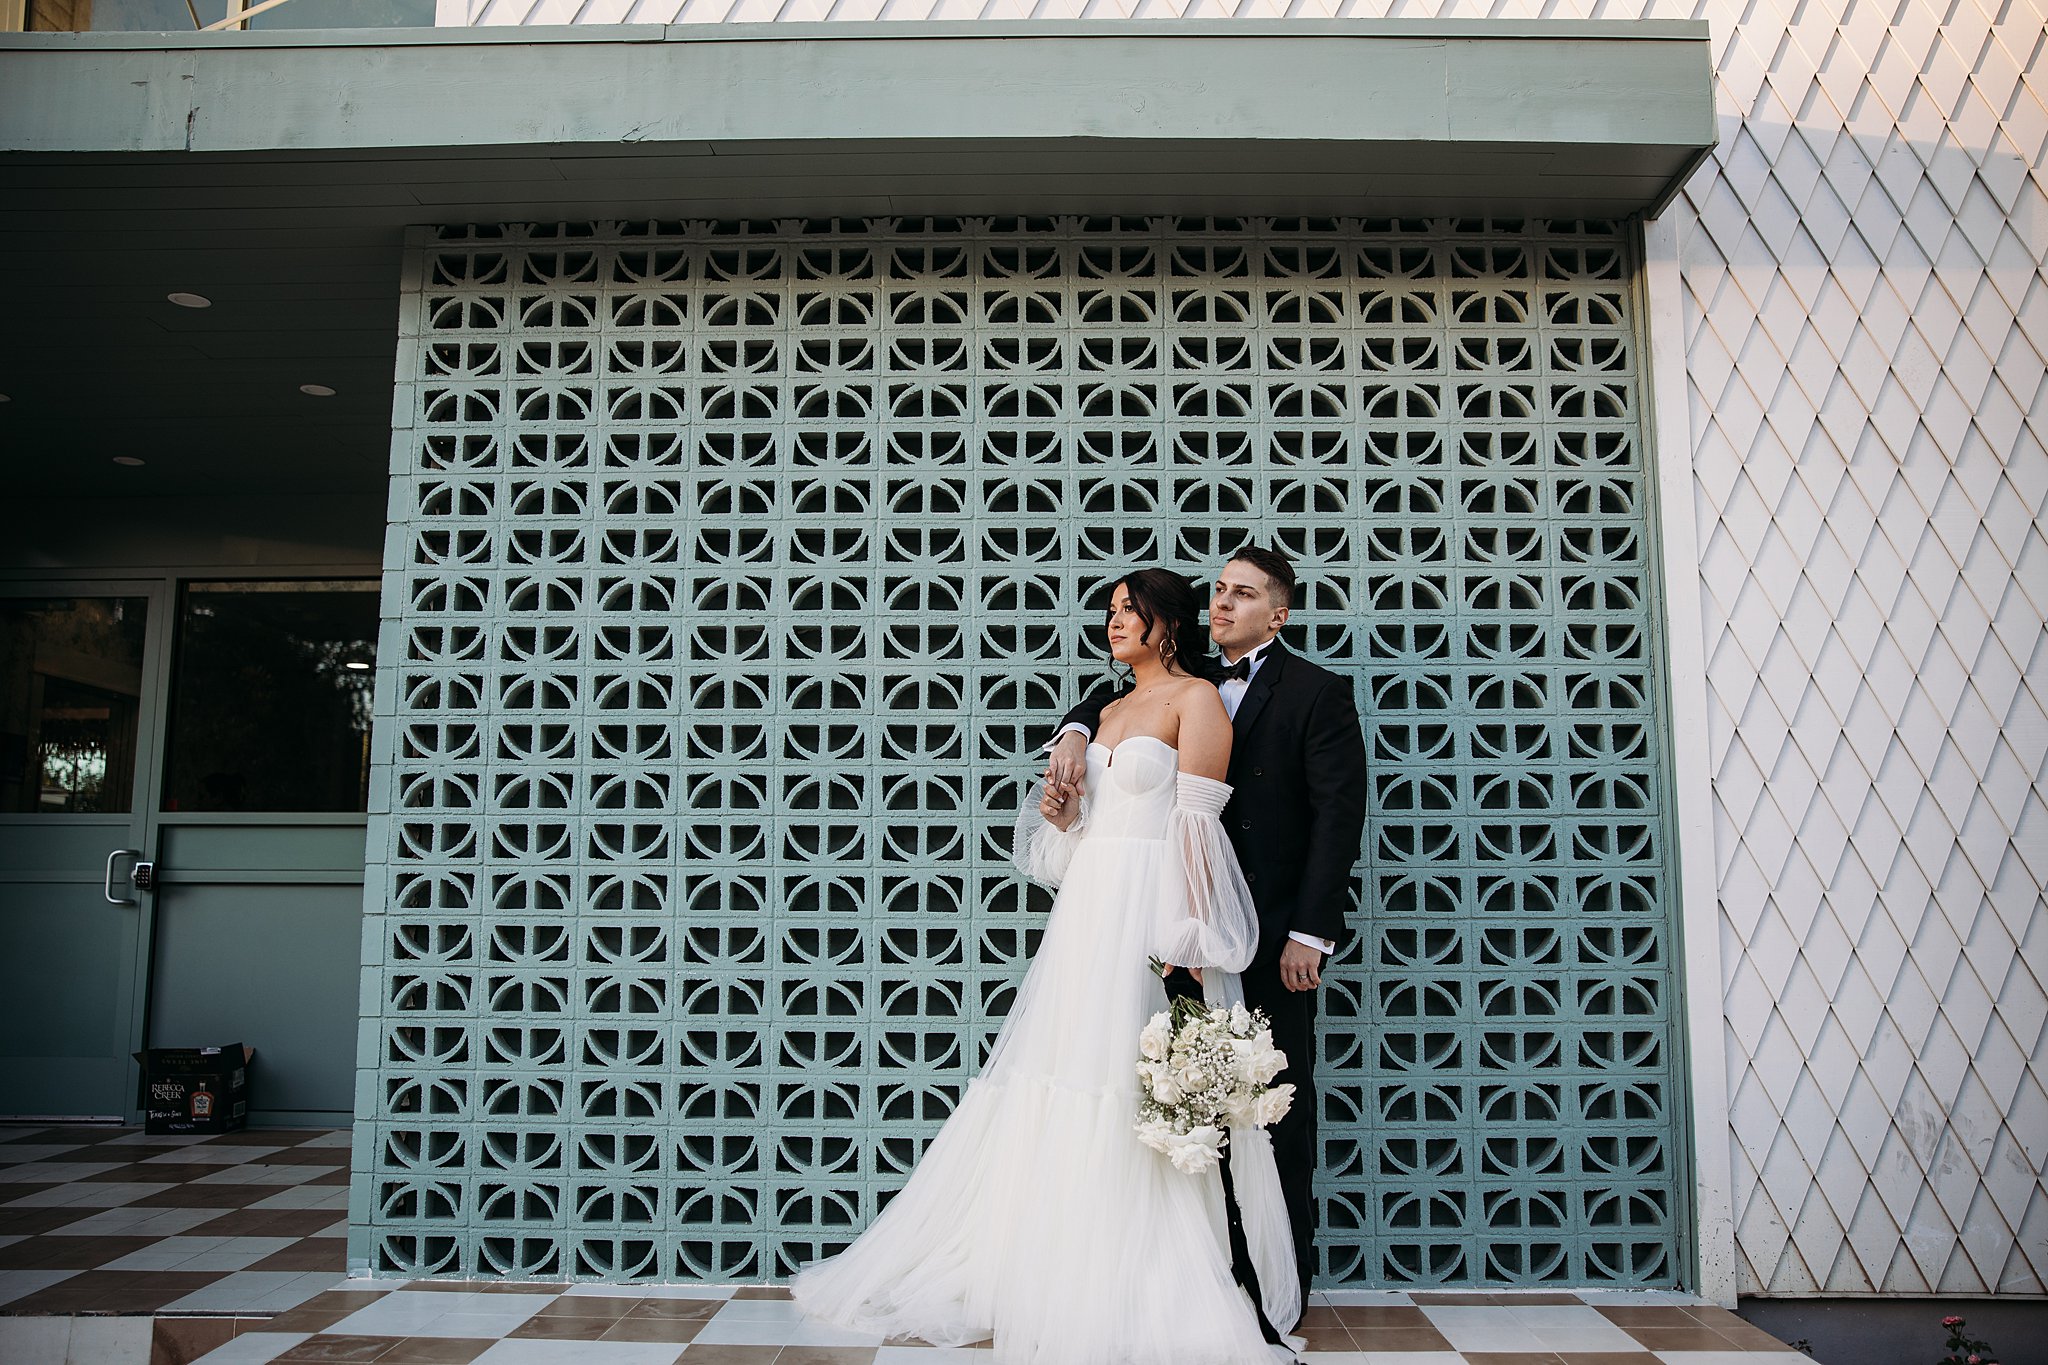 A newlywed couple pose for a photo in front of a wedding venue.